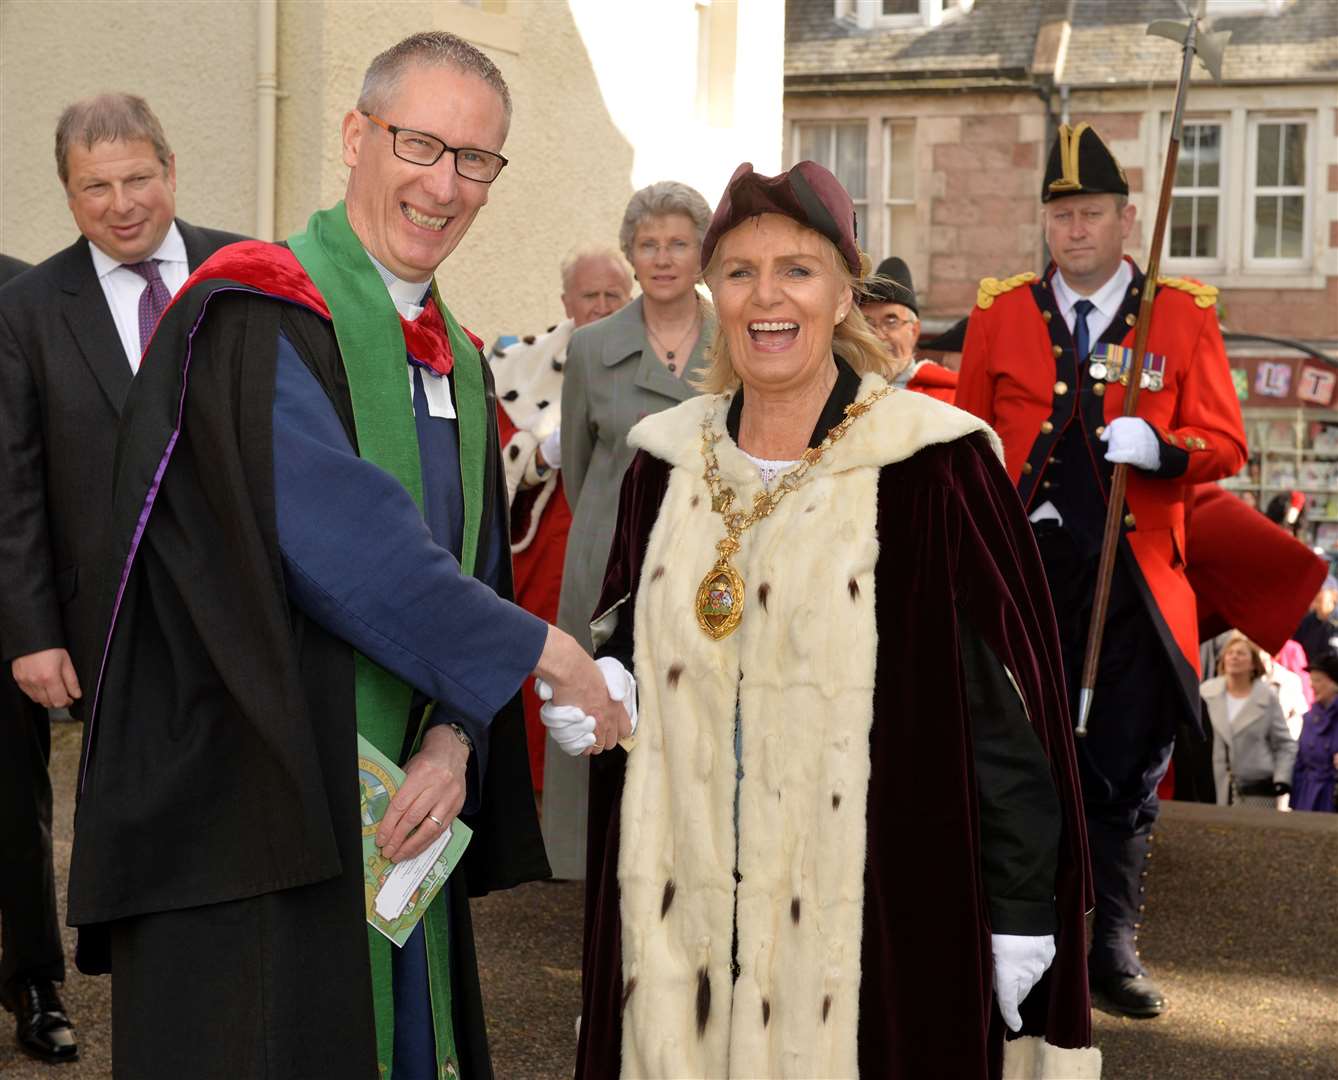 Former Provost Helen Carmichael in her robes - a new set have been ordered for her successor.